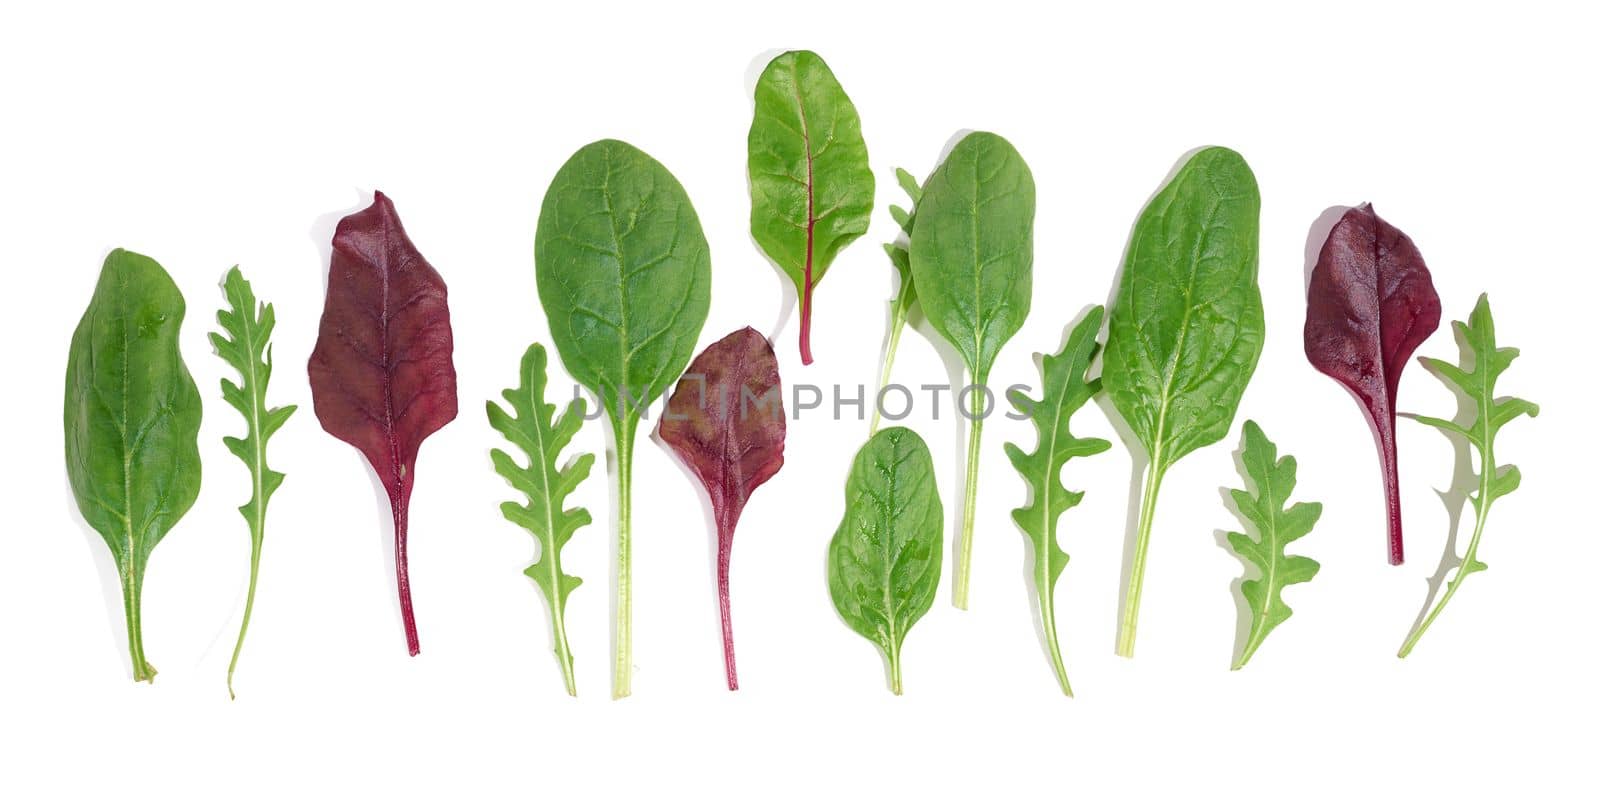 Fresh green leaves of arugula, spinach, chard on a white isolated background. Salad mix by ndanko